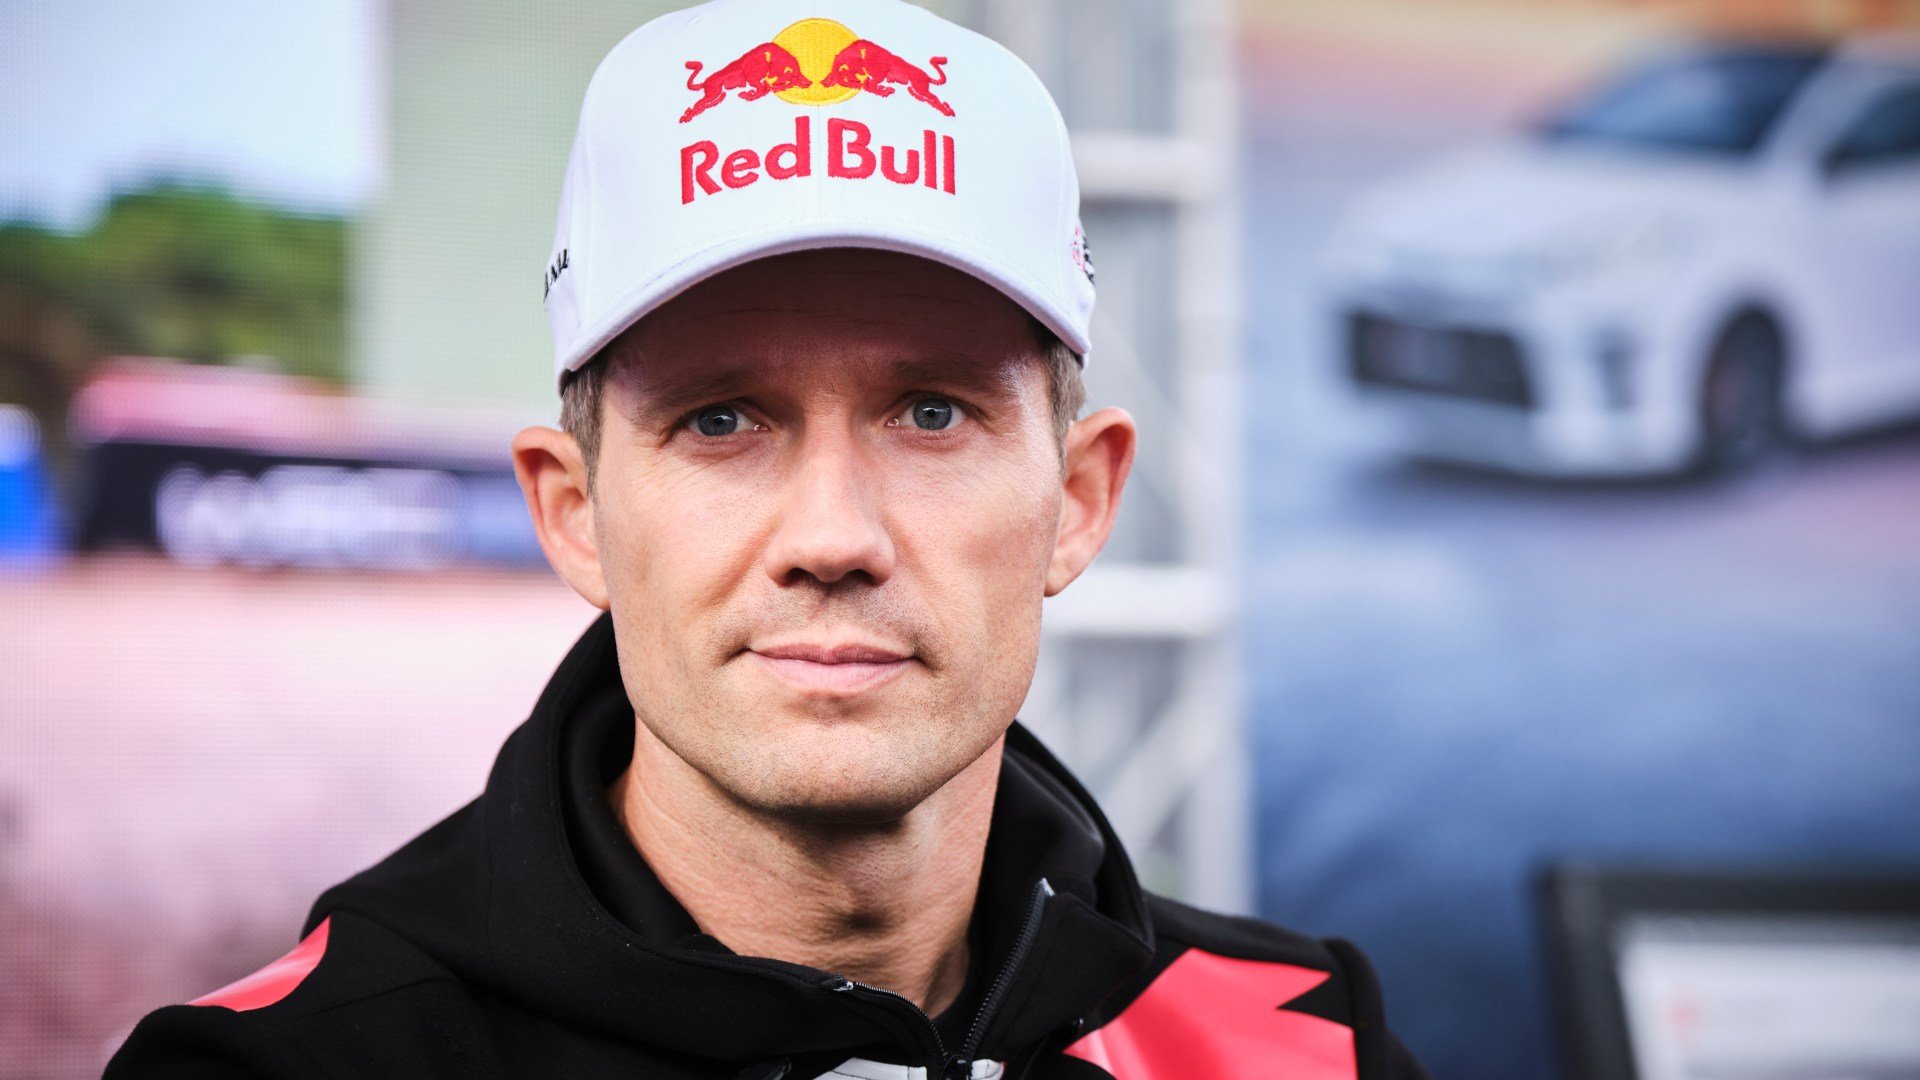 World rally champion Sebastien Ogier airlifted to hospital after horror crash with elderly couple